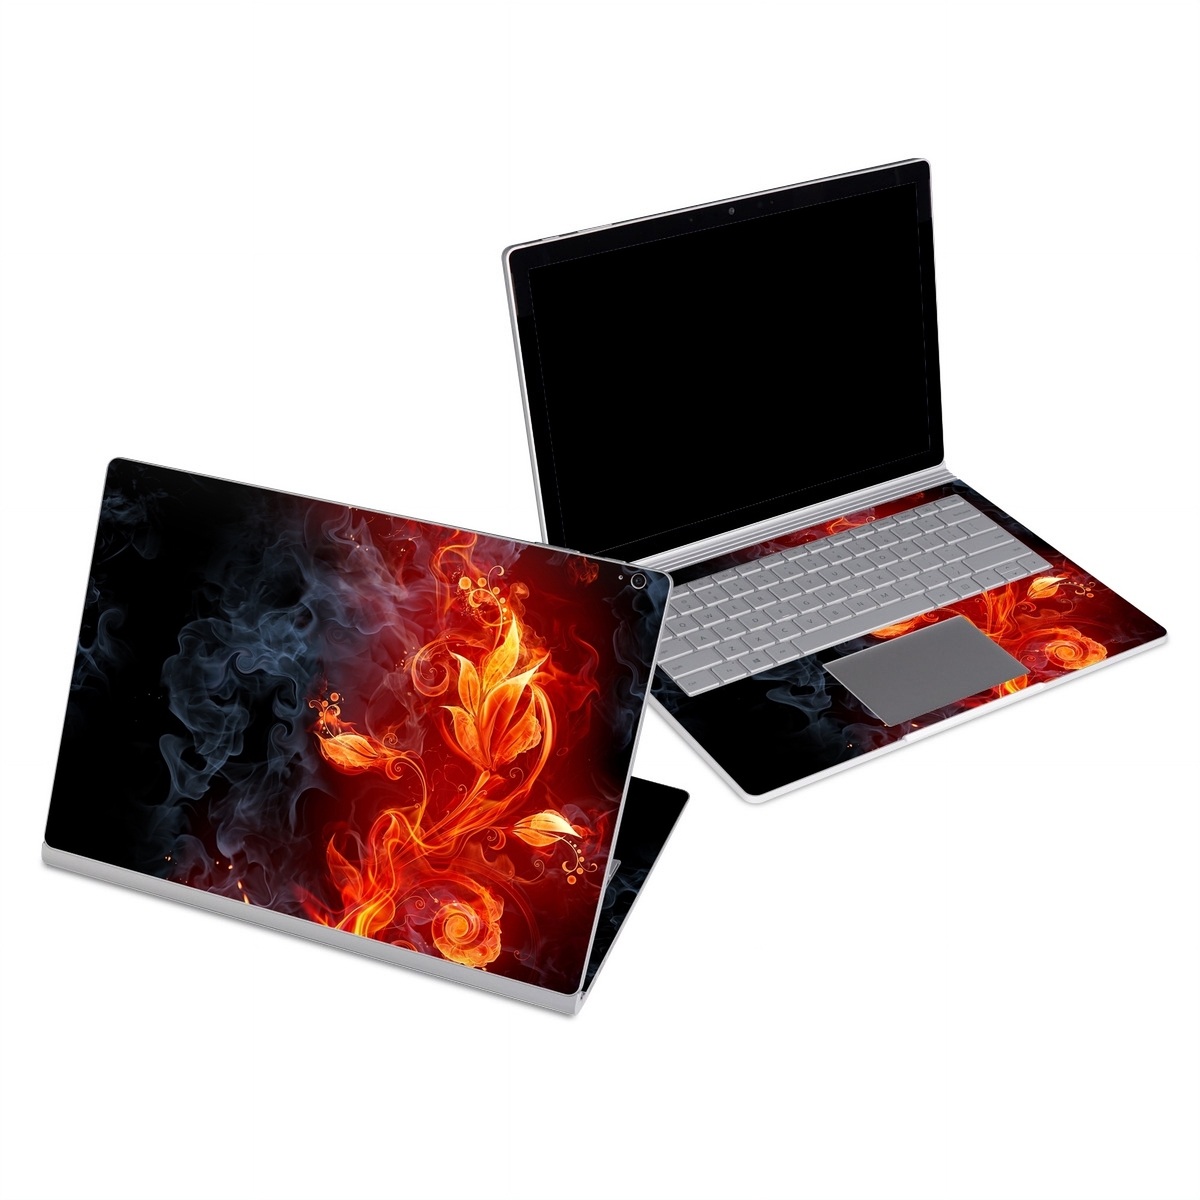 Microsoft Surface Book Series Skin design of Flame, Fire, Heat, Red, Orange, Fractal art, Graphic design, Geological phenomenon, Design, Organism, with black, red, orange colors